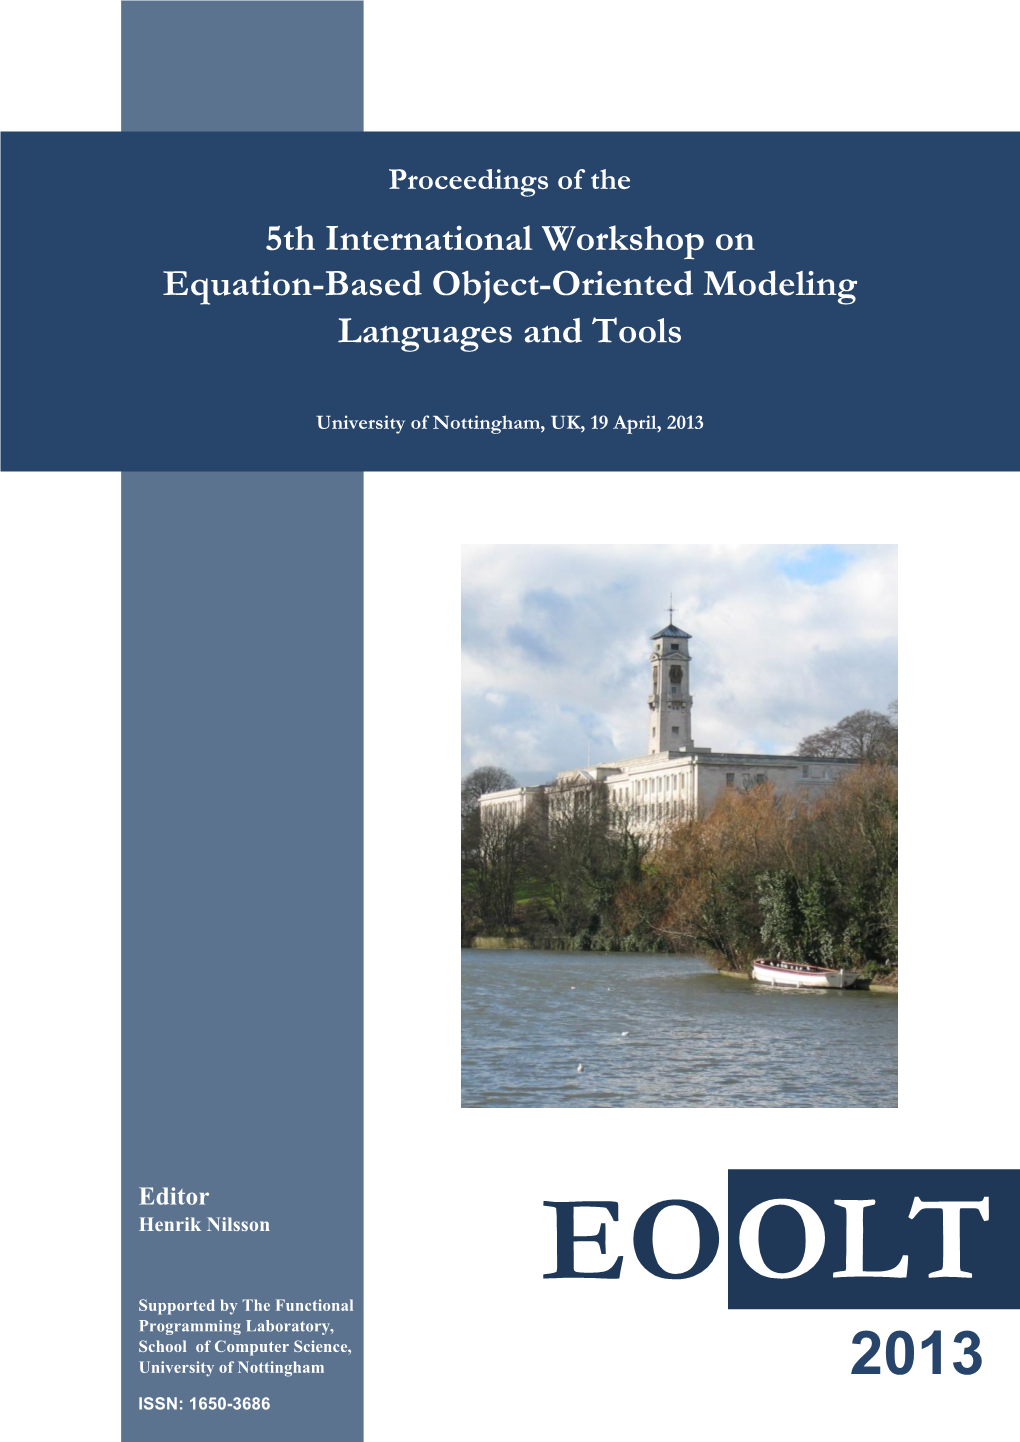 5Th International Workshop on Equation-Based Object-Oriented Modeling Languages and Tools